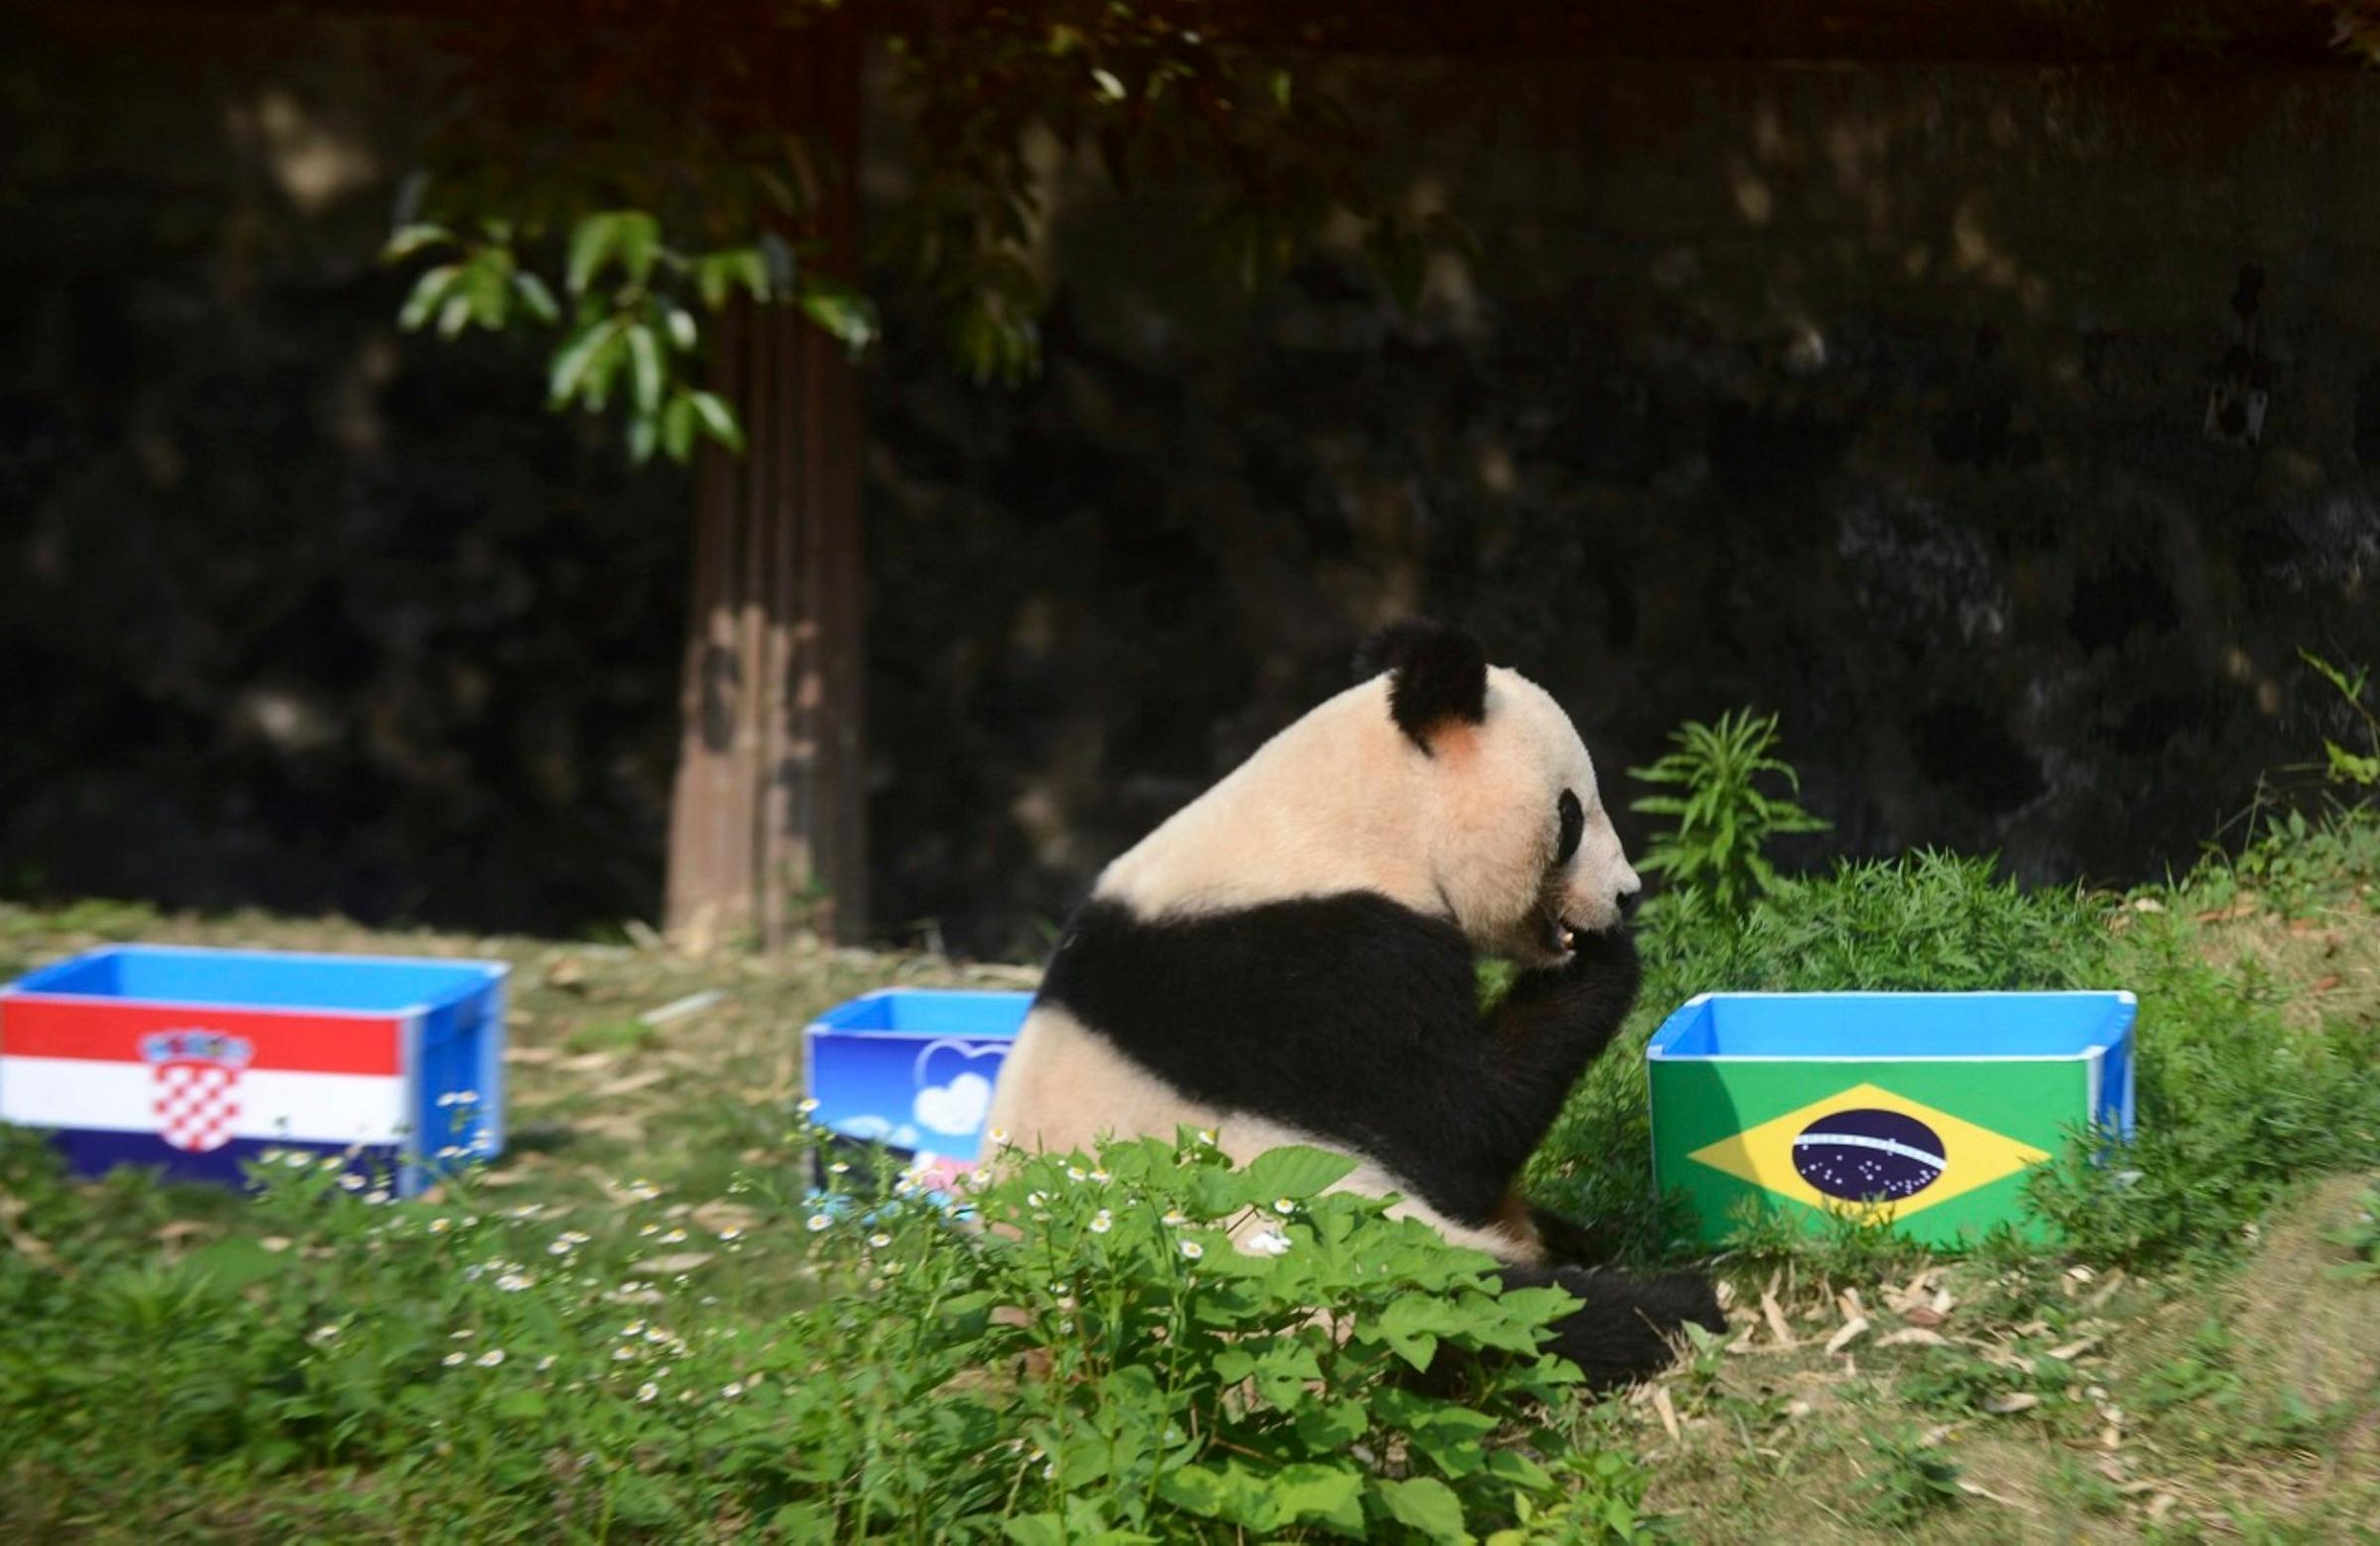 Giant panda Ying Mei sits next to a box of food with the Brazilian flag on it, during an event called "Panda Predicts World Cup Results", in Yangzhou, China on June 12, 2014.